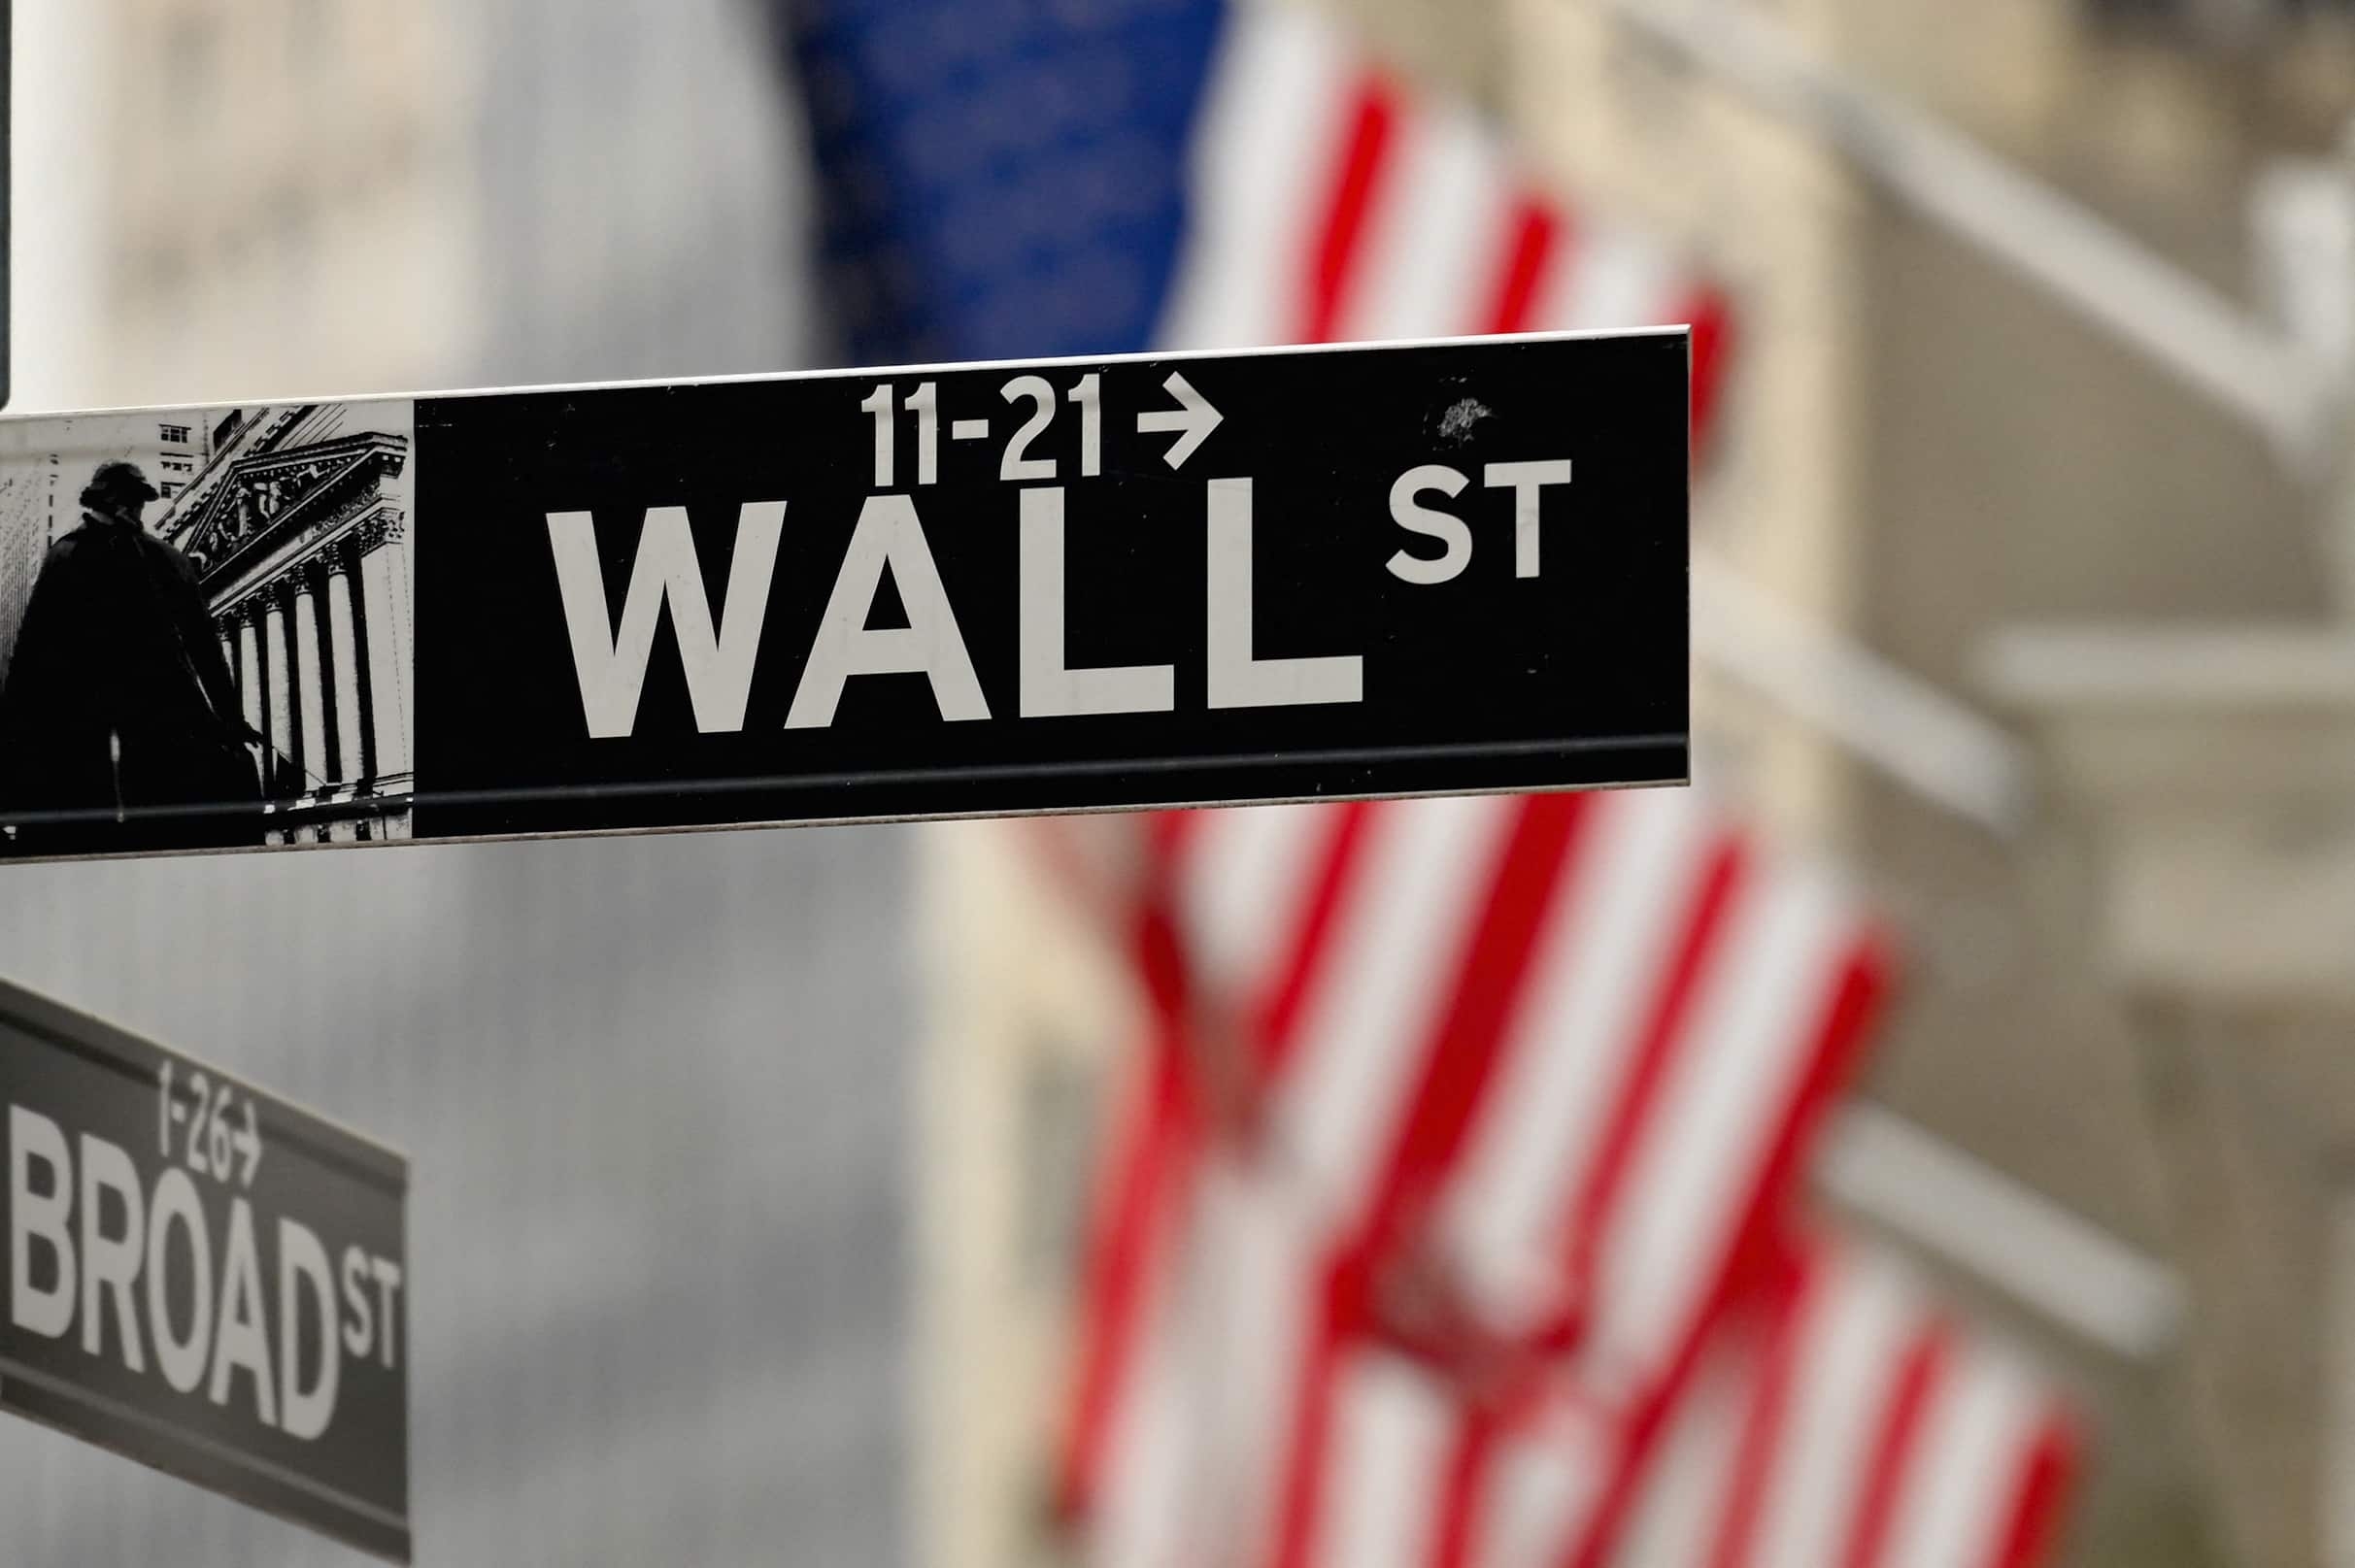 Wall Street resumed its slide on Thursday, ending in the red as inflation hit a four-decade high, cementing expectations that the US Federal Reserve would hike key interest rates at the conclusion of next week's monetary policy meeting to prevent the economy from overheating. The Dow Jones Industrial Average fell 112.18 points, or 0.34%, to 33,174.07, the S&amp;P 500 lost 18.36 points, or 0.43%, to 4,259.52 and the Nasdaq Composite dropped 125.58 points, or 0.95%, to 13,129.96.